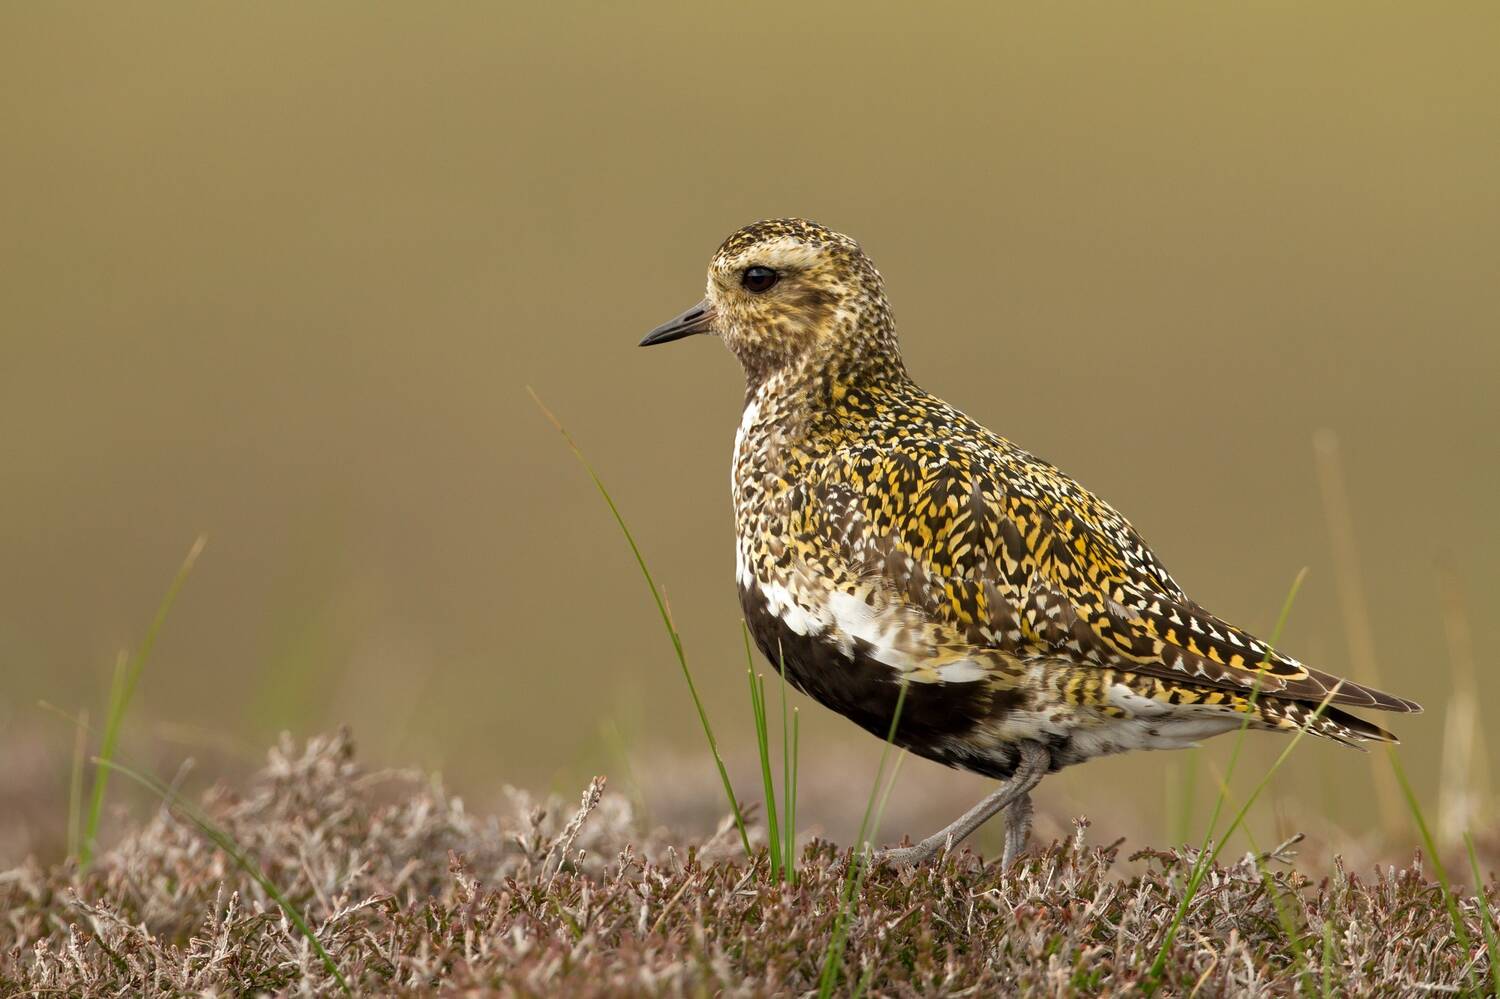 A small bird stands on a mossy rock with occasional blades of grass growing through. The bird has a golden and black speckled back, with a black tummy and small round head.